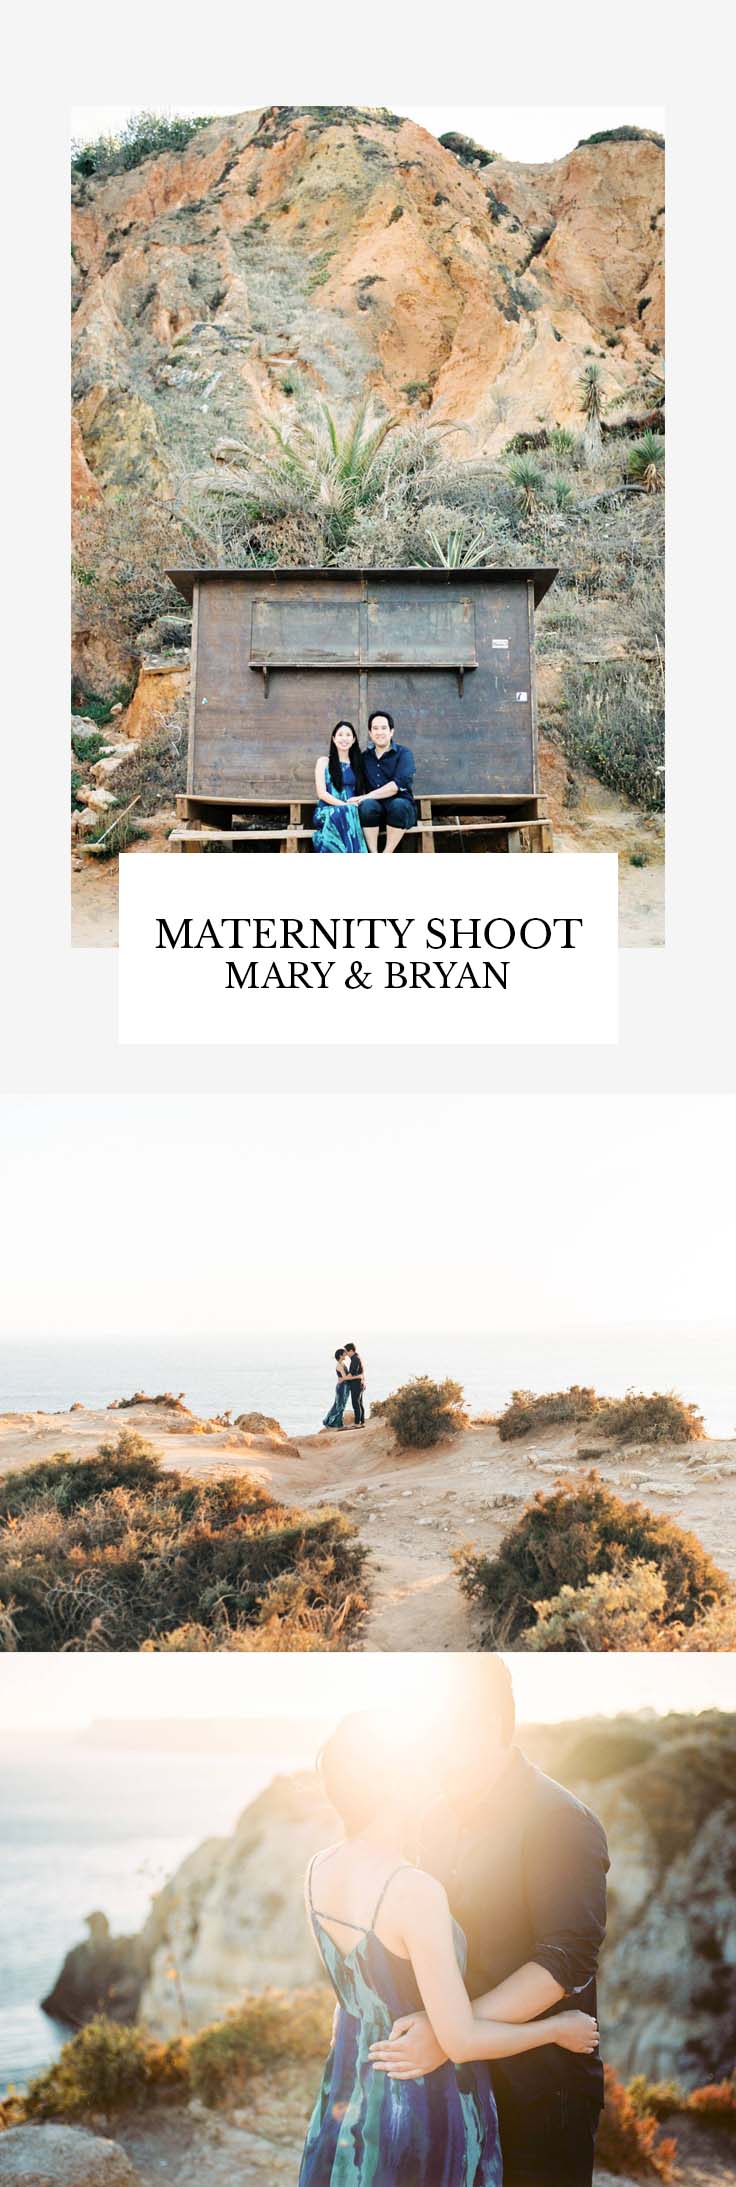 Maternity Shoot - Mary & Bryan in Portugal